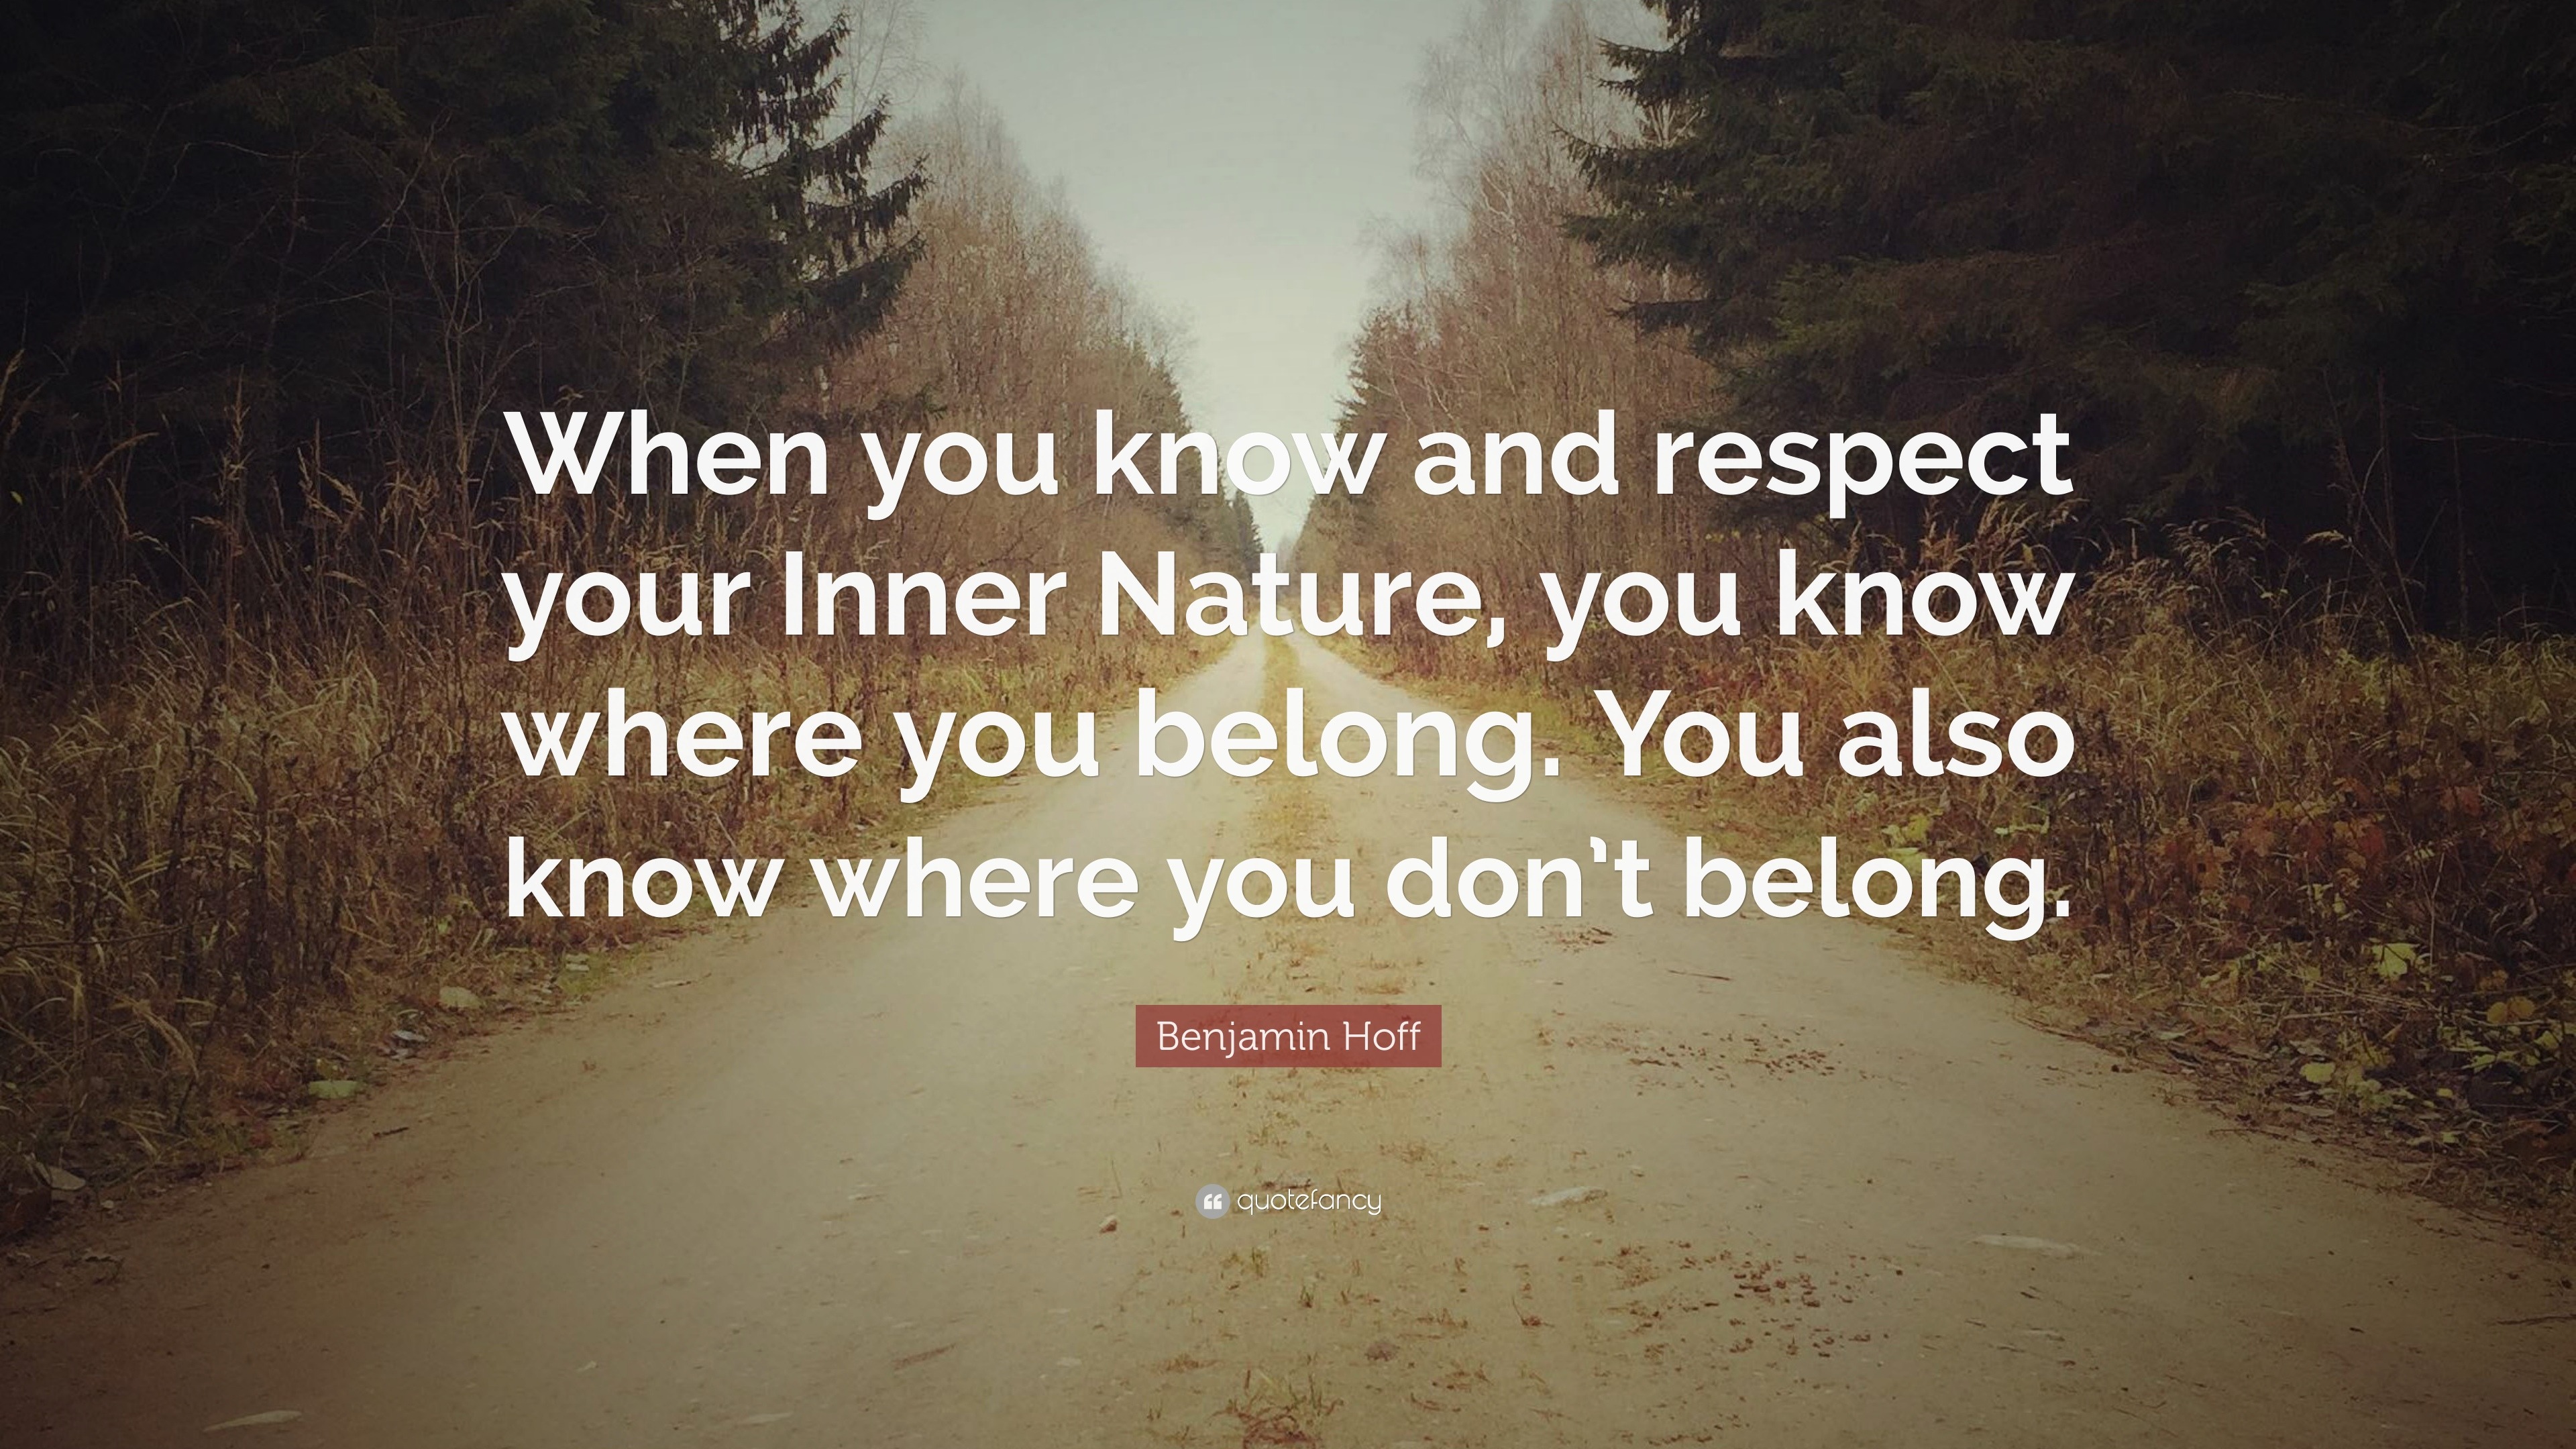 Benjamin Hoff Quote: “When you know and respect your Inner Nature, you